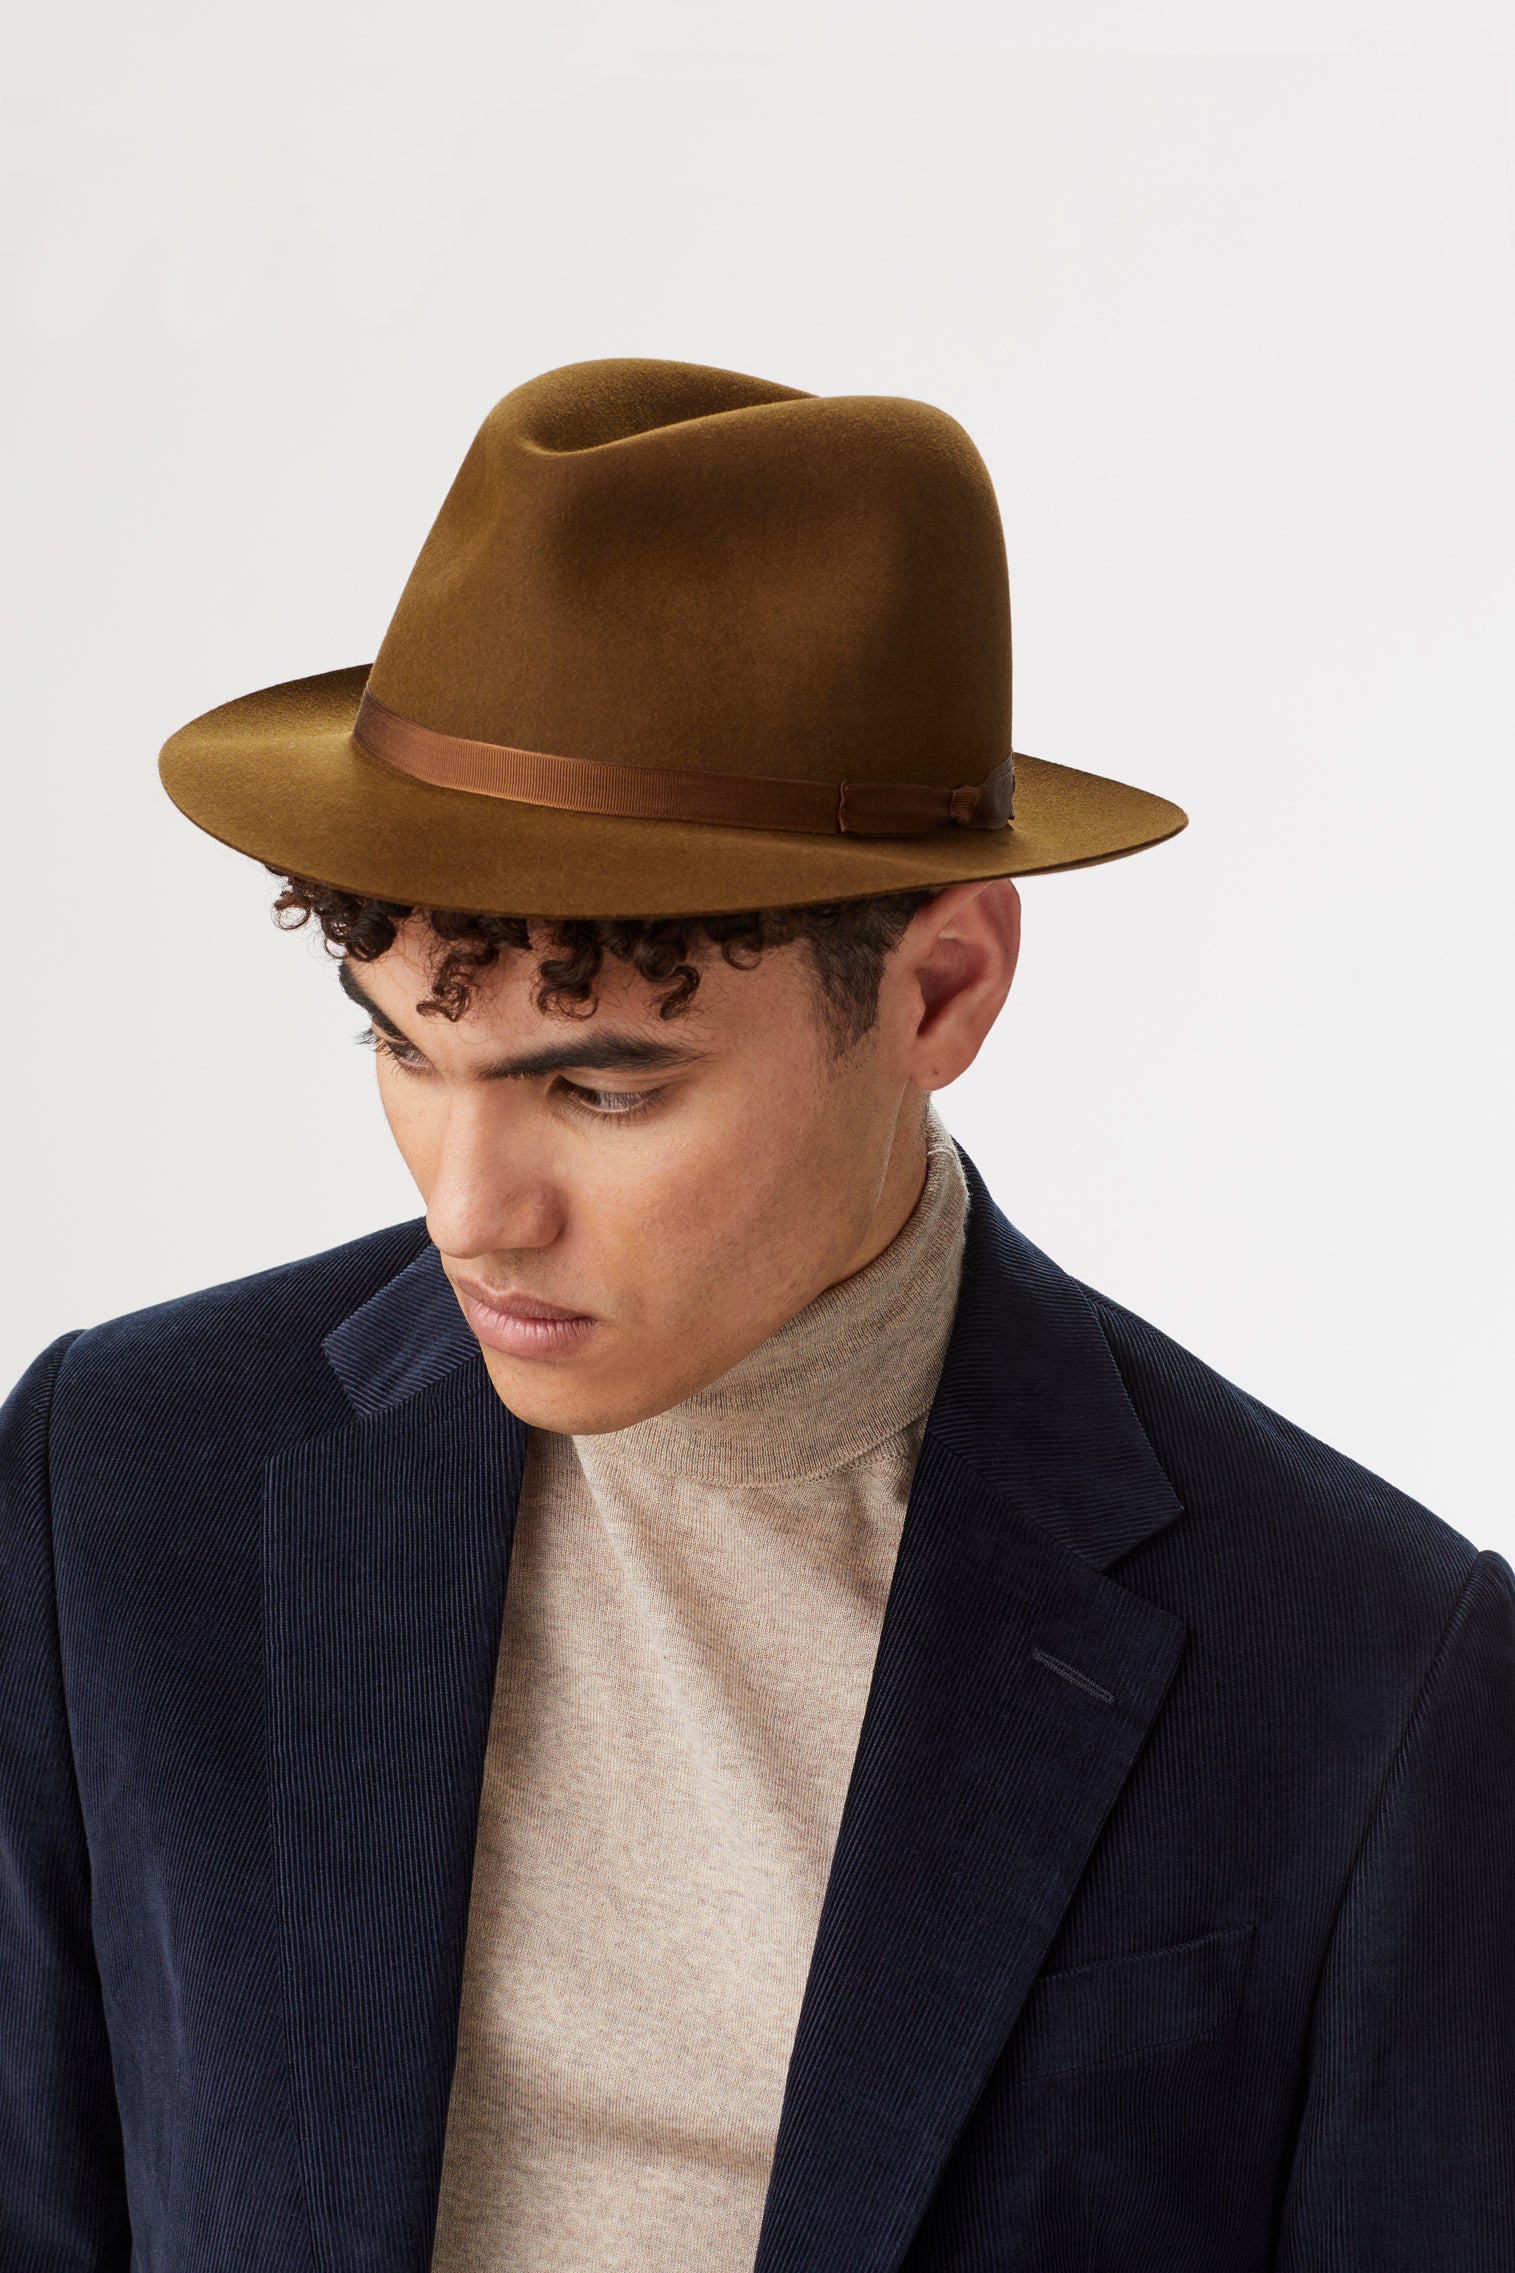 Voyager Rollable Trilby - Hats for Oval Face Shapes - Lock & Co. Hatters London UK